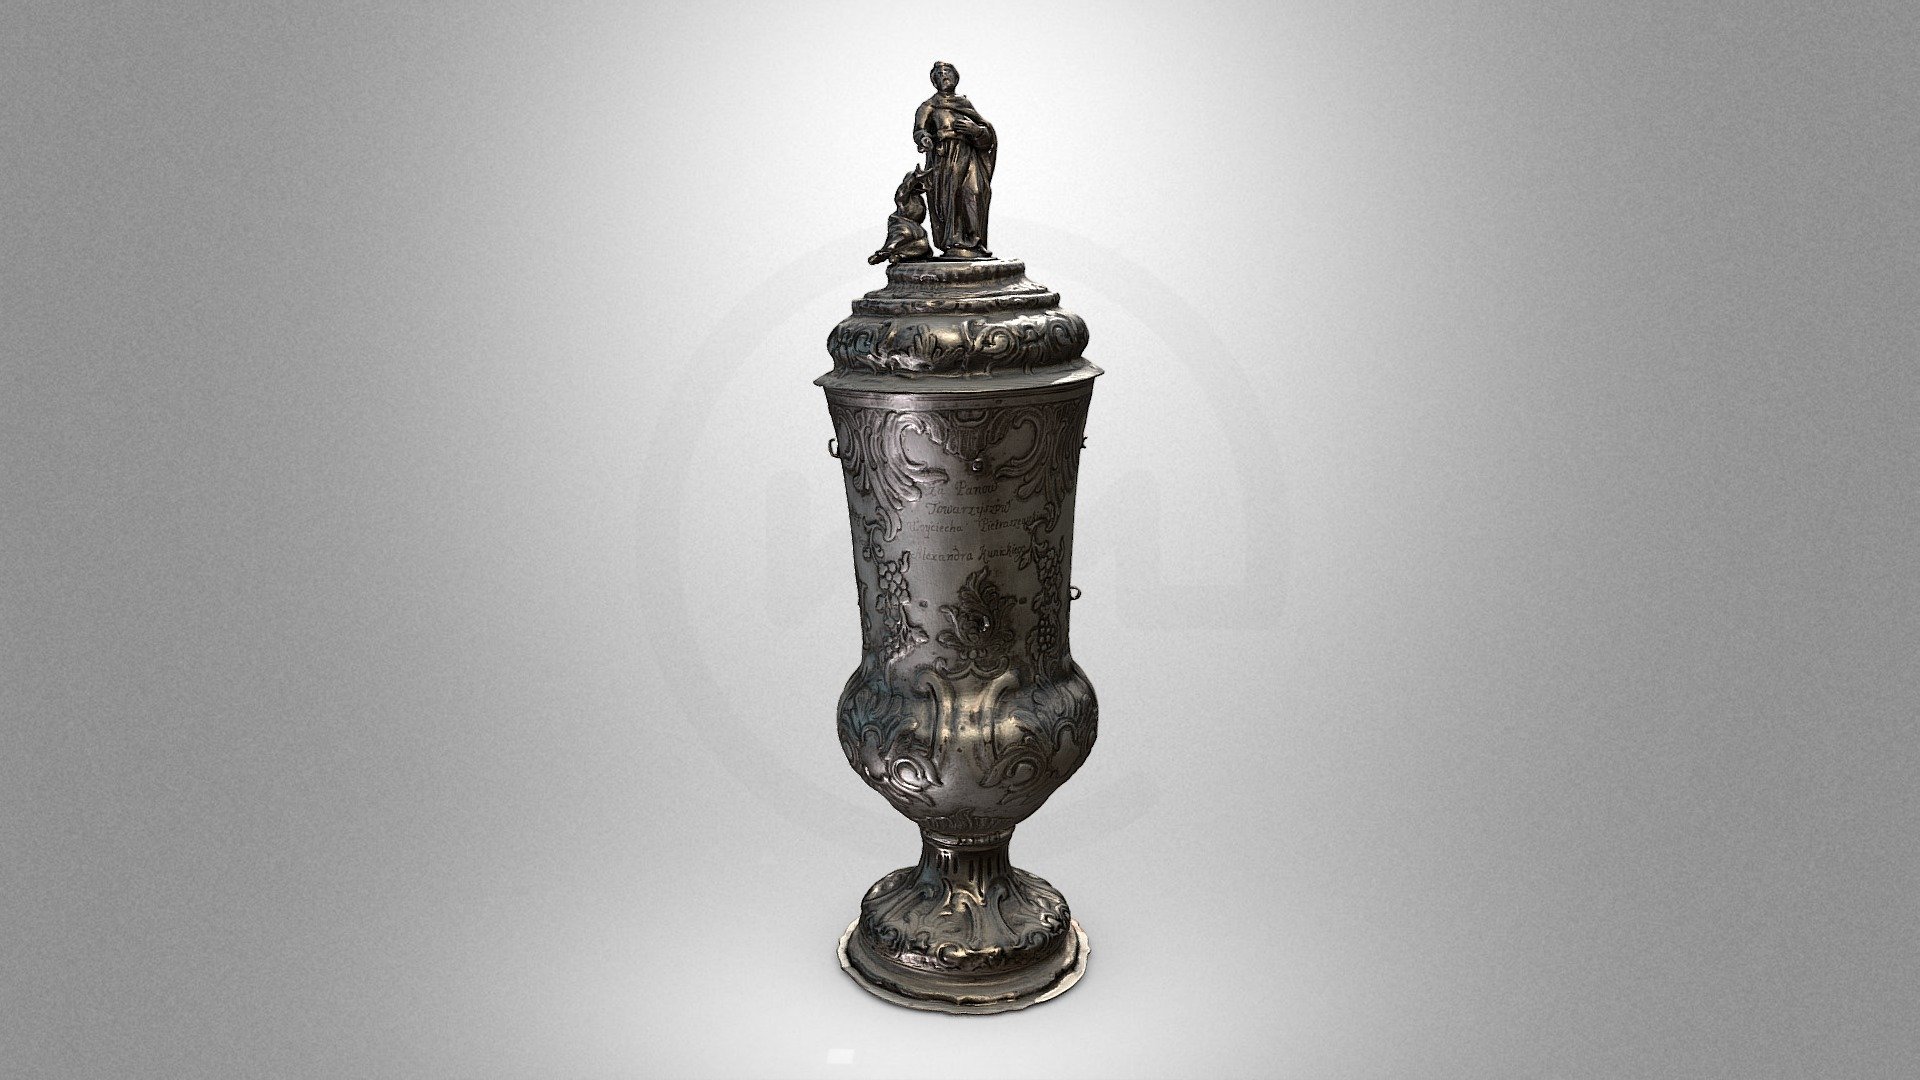 The Welcoming Goblet belonged to the guild of tailors, as shown by the engraved inscriptions and a figurine of Saint Homobonus, the patron saint of tailors and clothiers.

The National Museum in Kraków

Inventory number: MNK ND-782/a-b

Creator: Marcin Lekszycki (d. 1798)

Time of creation: 1766

Place of creation:  Kraków

https://muzea.malopolska.pl/en/objects-list/282

Digitalisation: RDW MIC - Welcoming goblet of tailors’ guild - Download Free 3D model by Virtual Museums of Małopolska (@WirtualneMuzeaMalopolski) 3d model